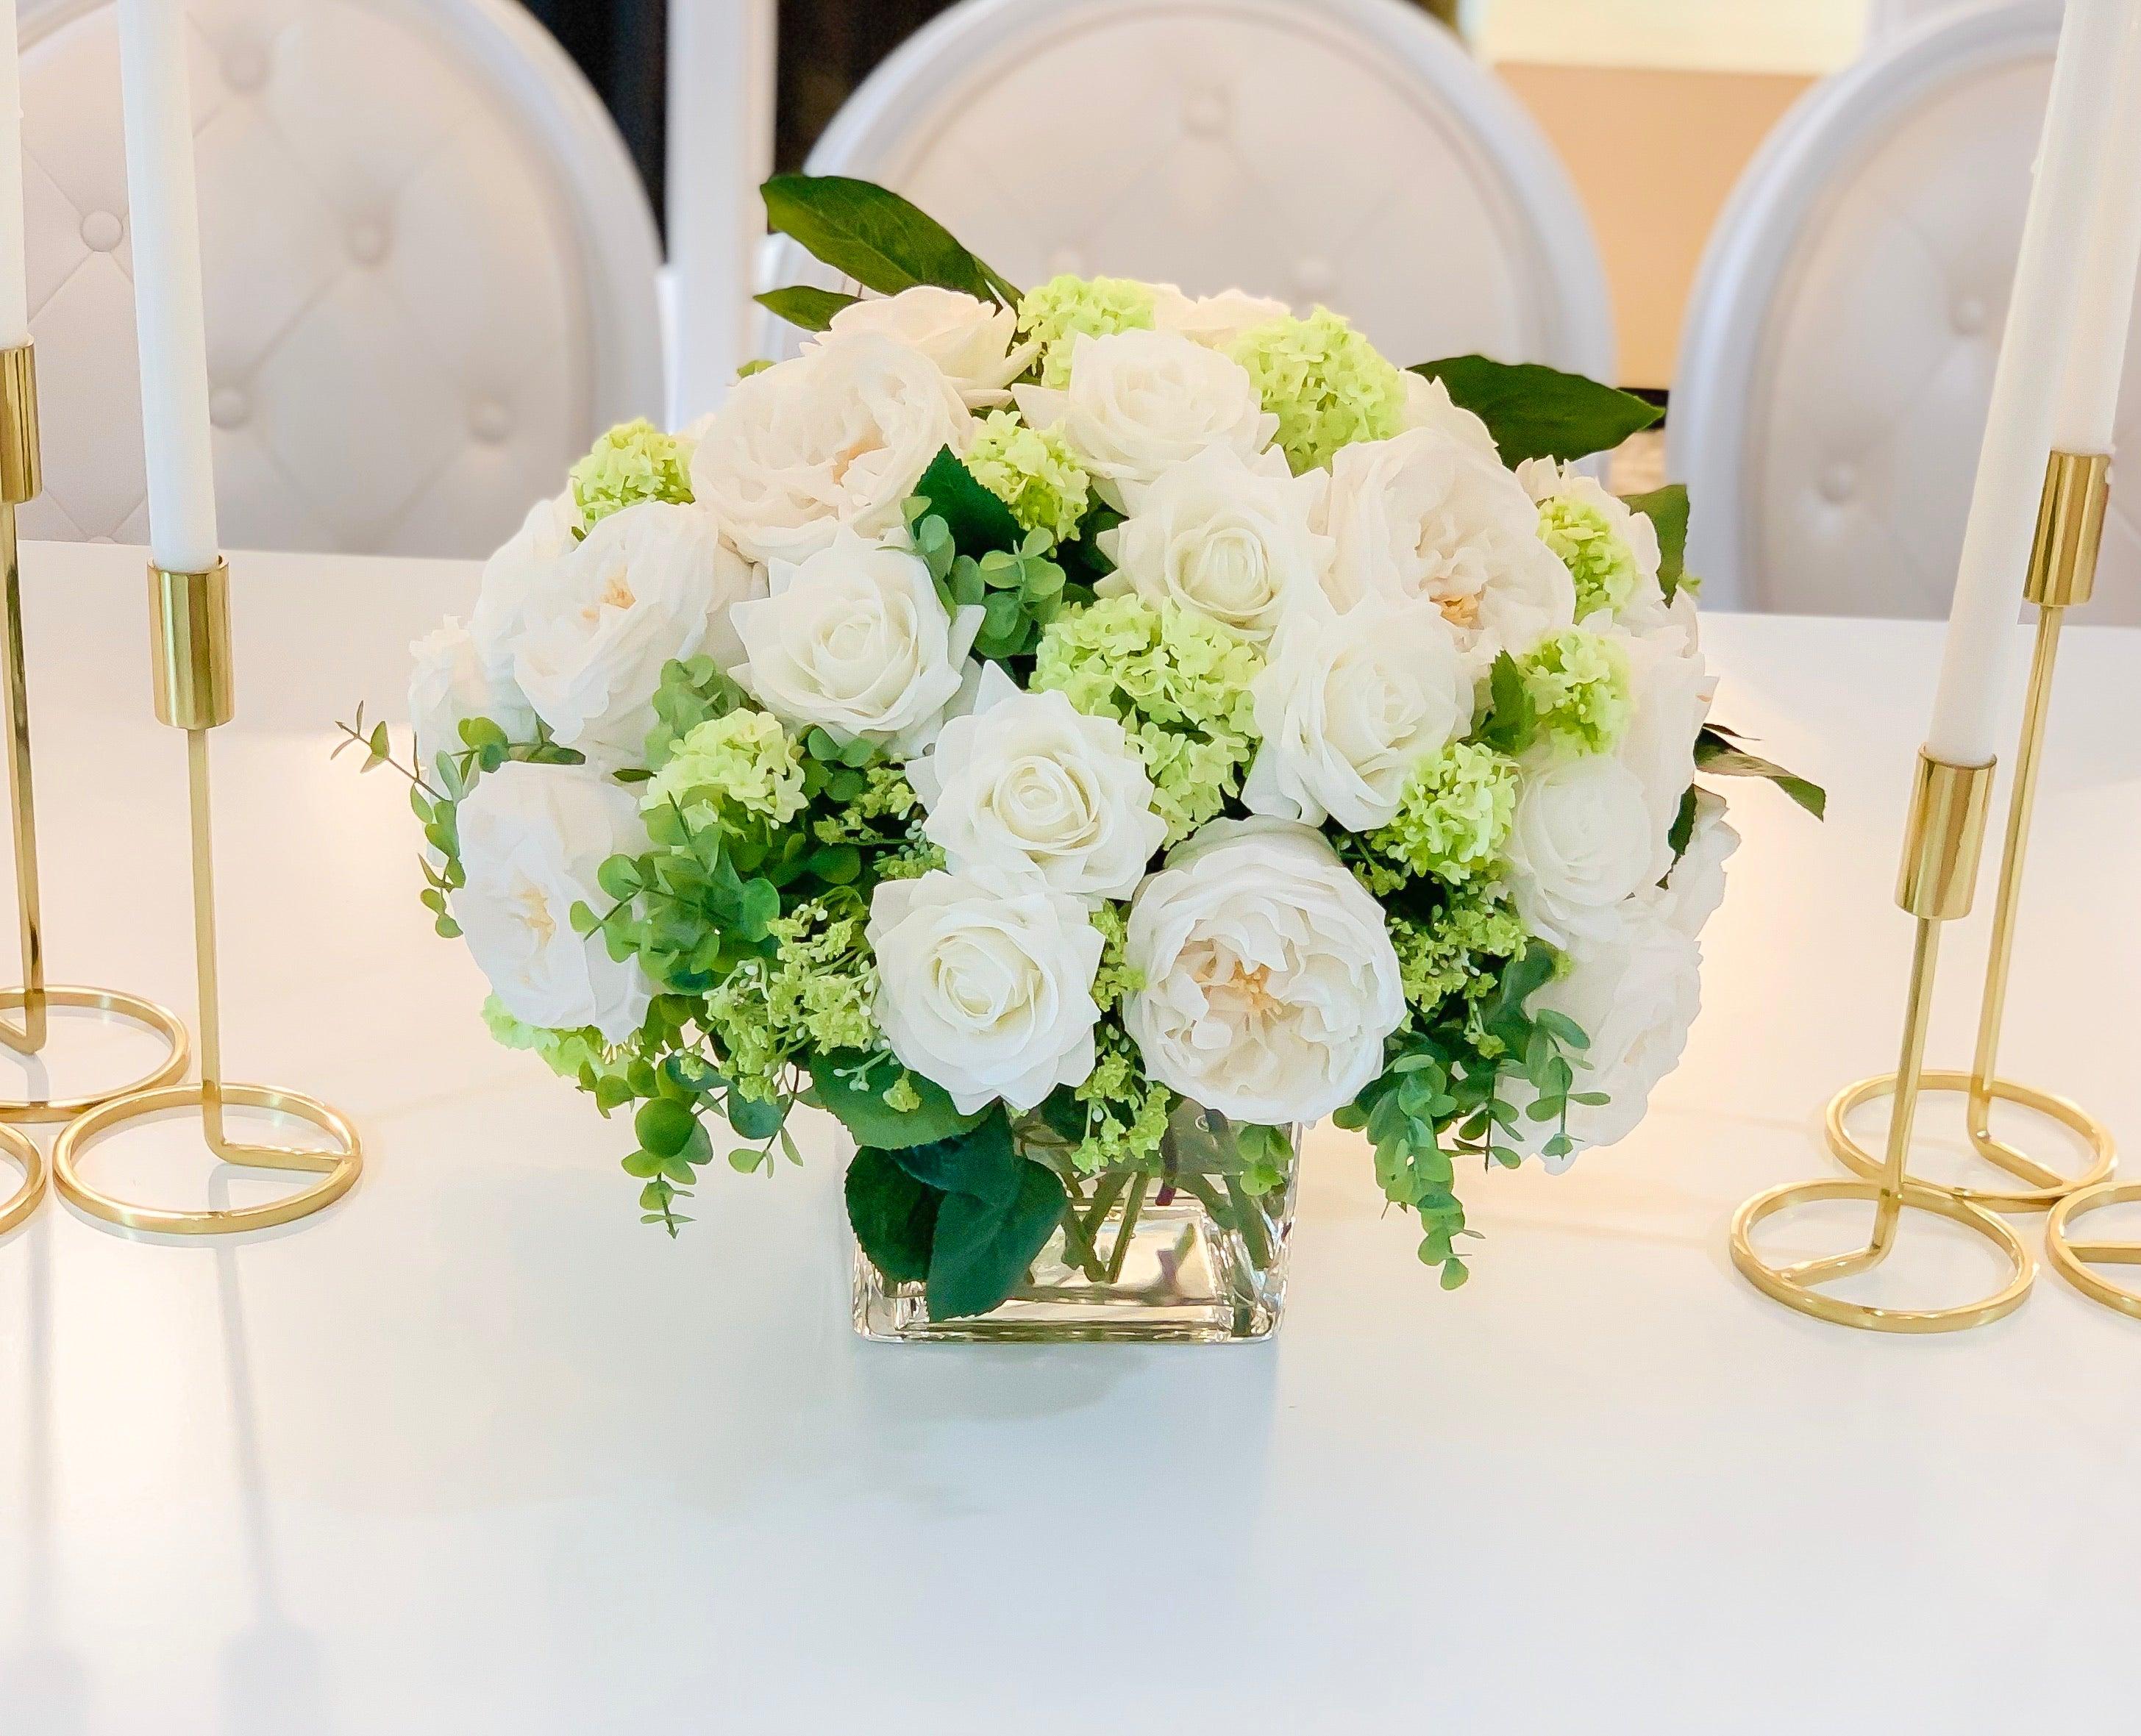 floral centerpieces for dining room tables